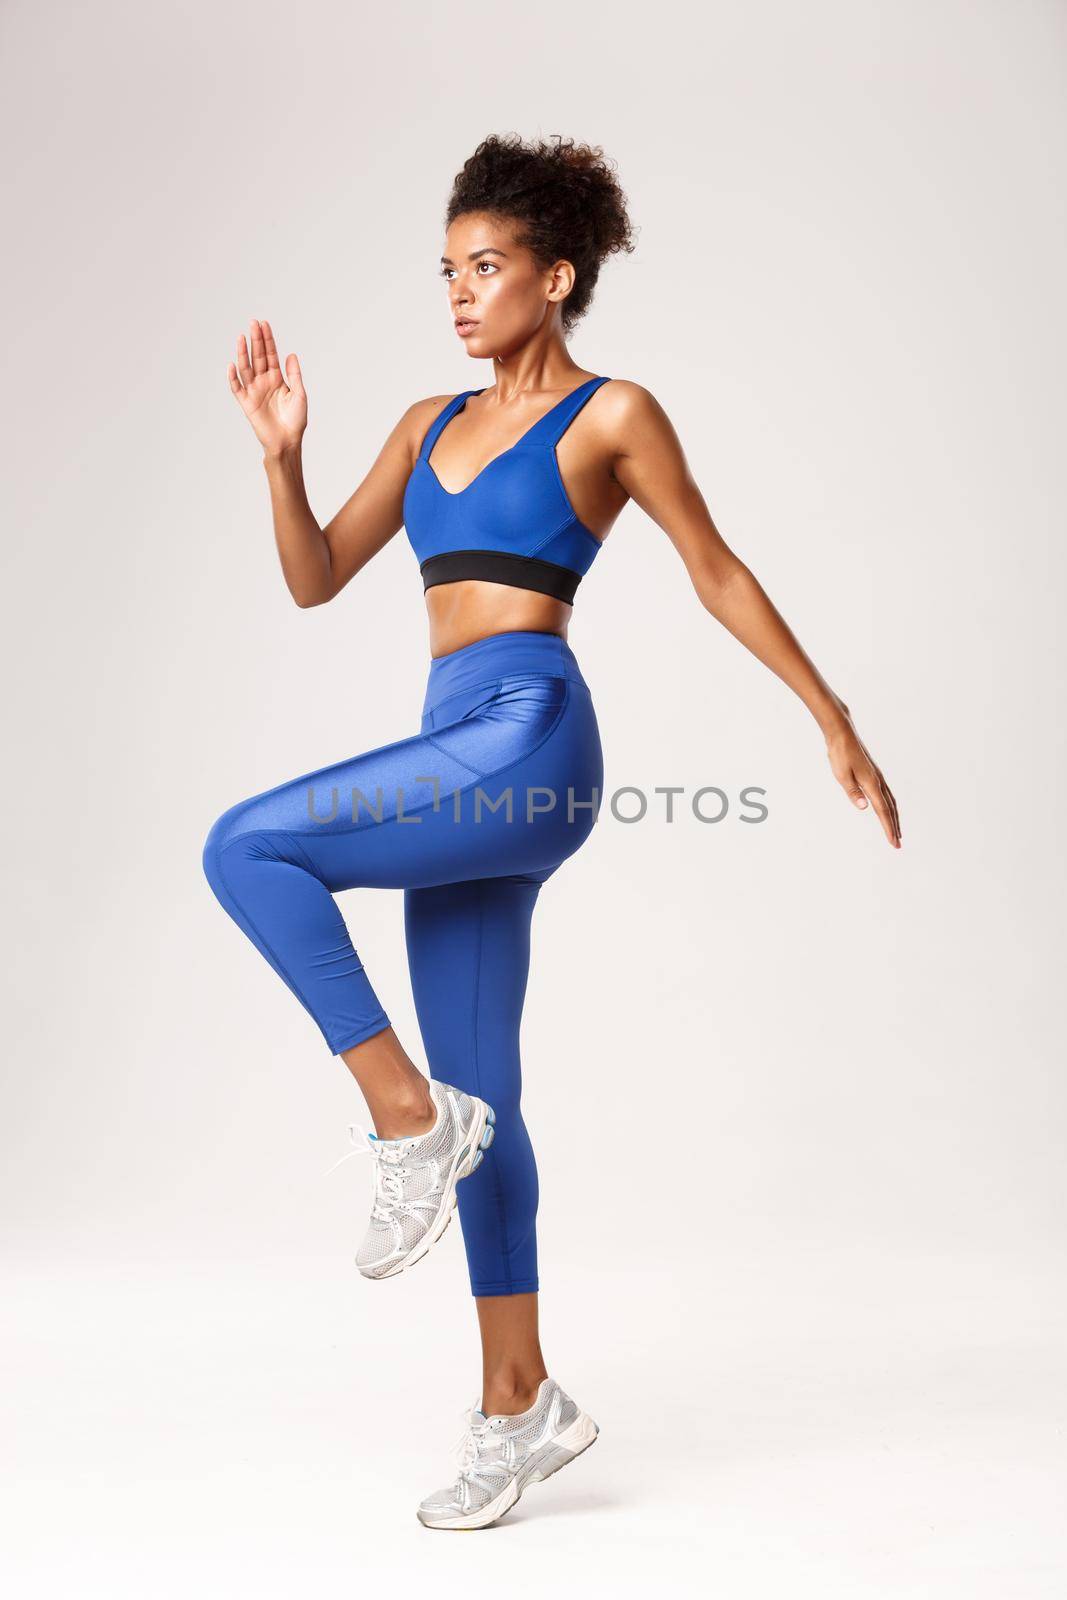 Full length profile shot of african-american sportswoman in fitness clothing, lift leg and looking serious during workout, exercising over white background.